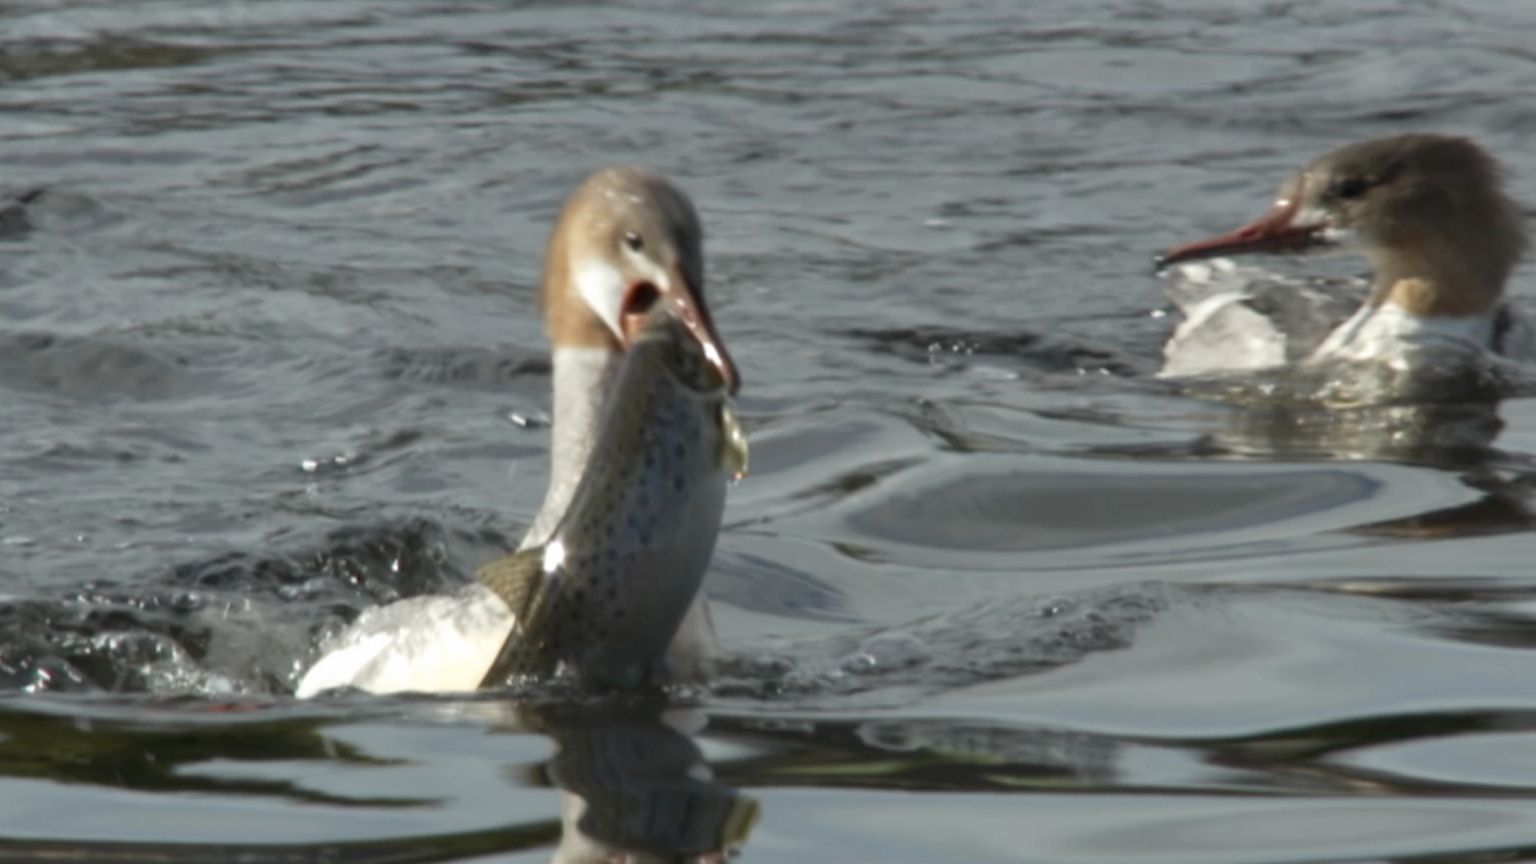 A goosander duck tries to capture a trout